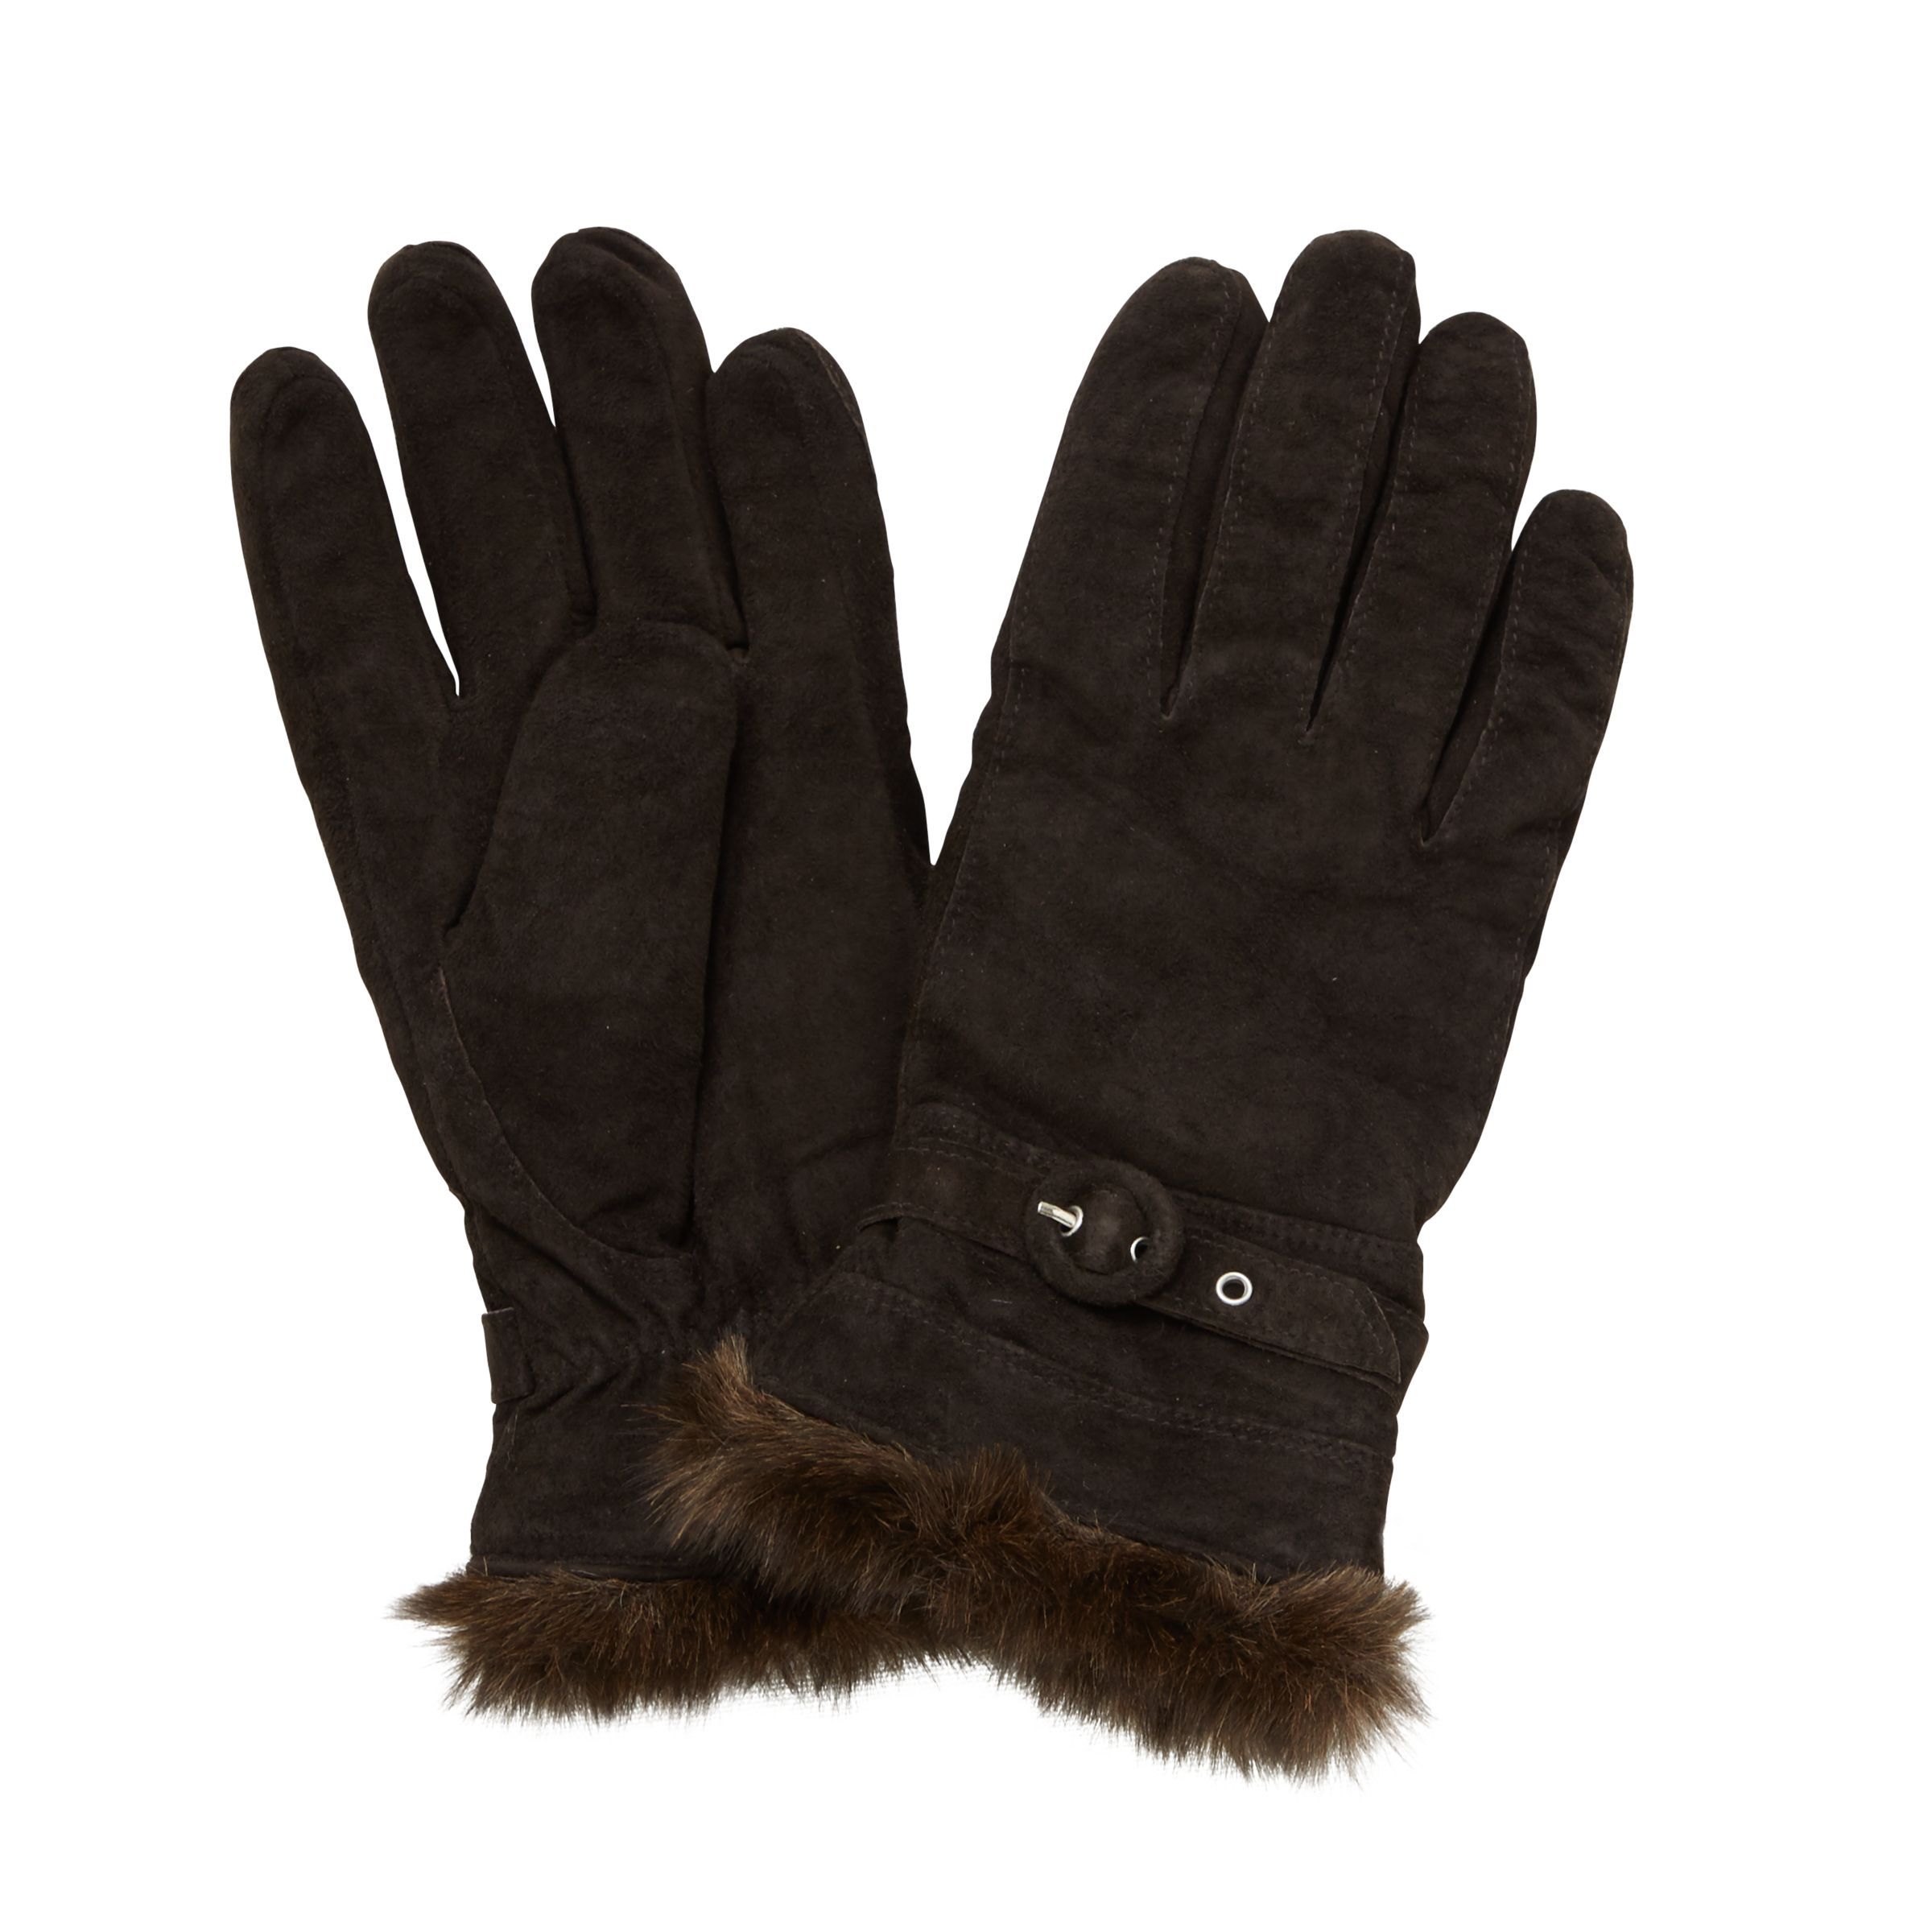 John Lewis & Partners Suede With Faux Fur Trim Thermal Gloves